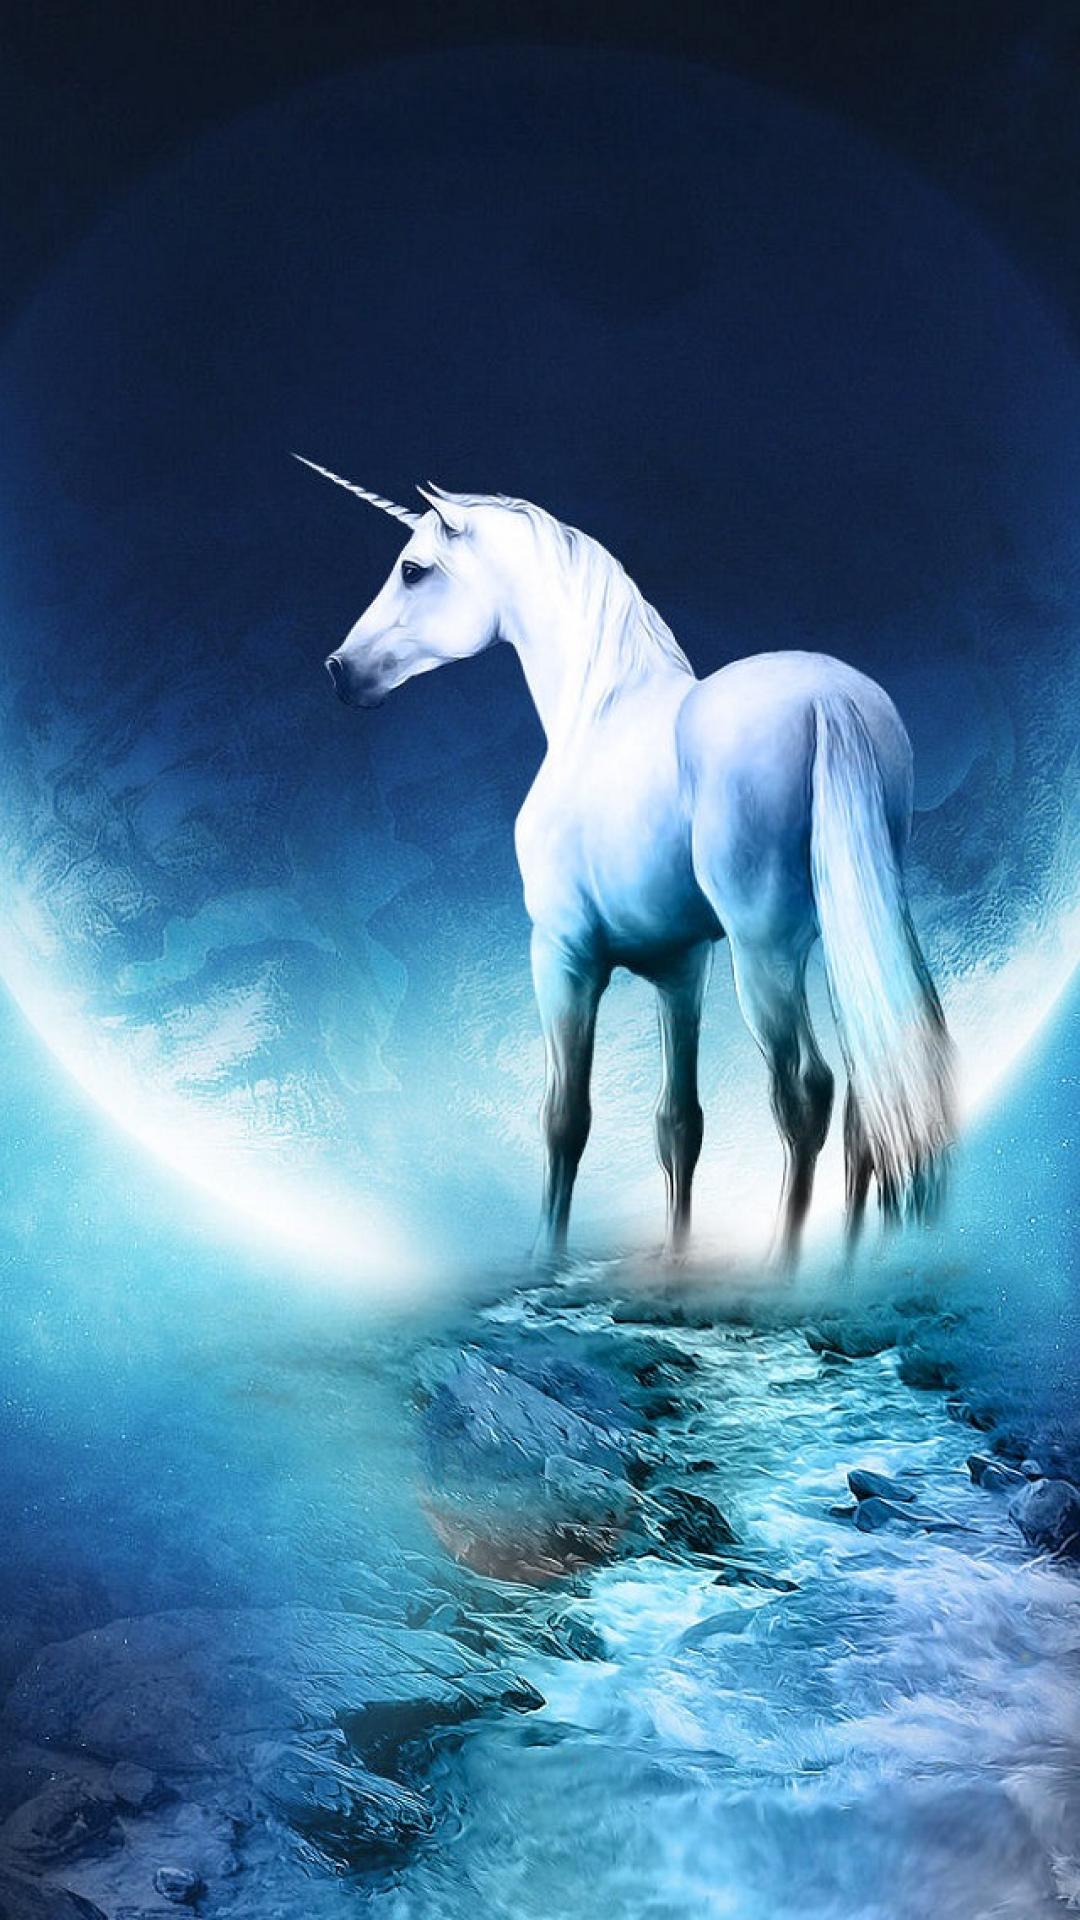 Galaxy Unicorn Wallpapers For Ipads - Phortography